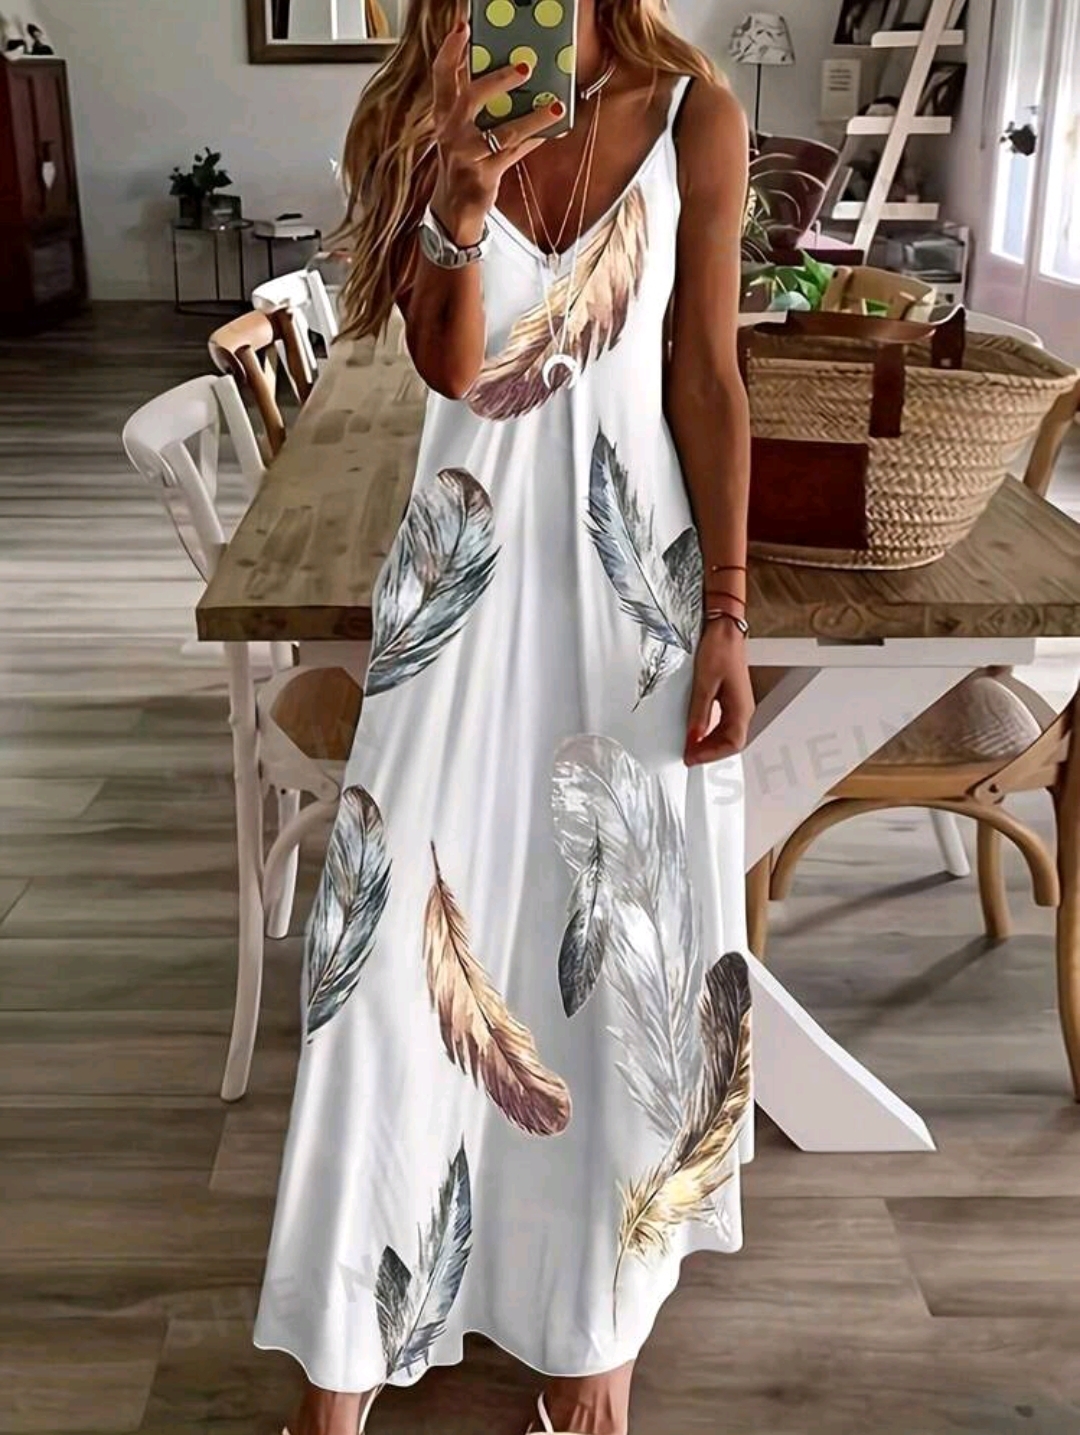 SHEIN LUNE Feather Printed Loose V-Neck Summer Casual Sundress